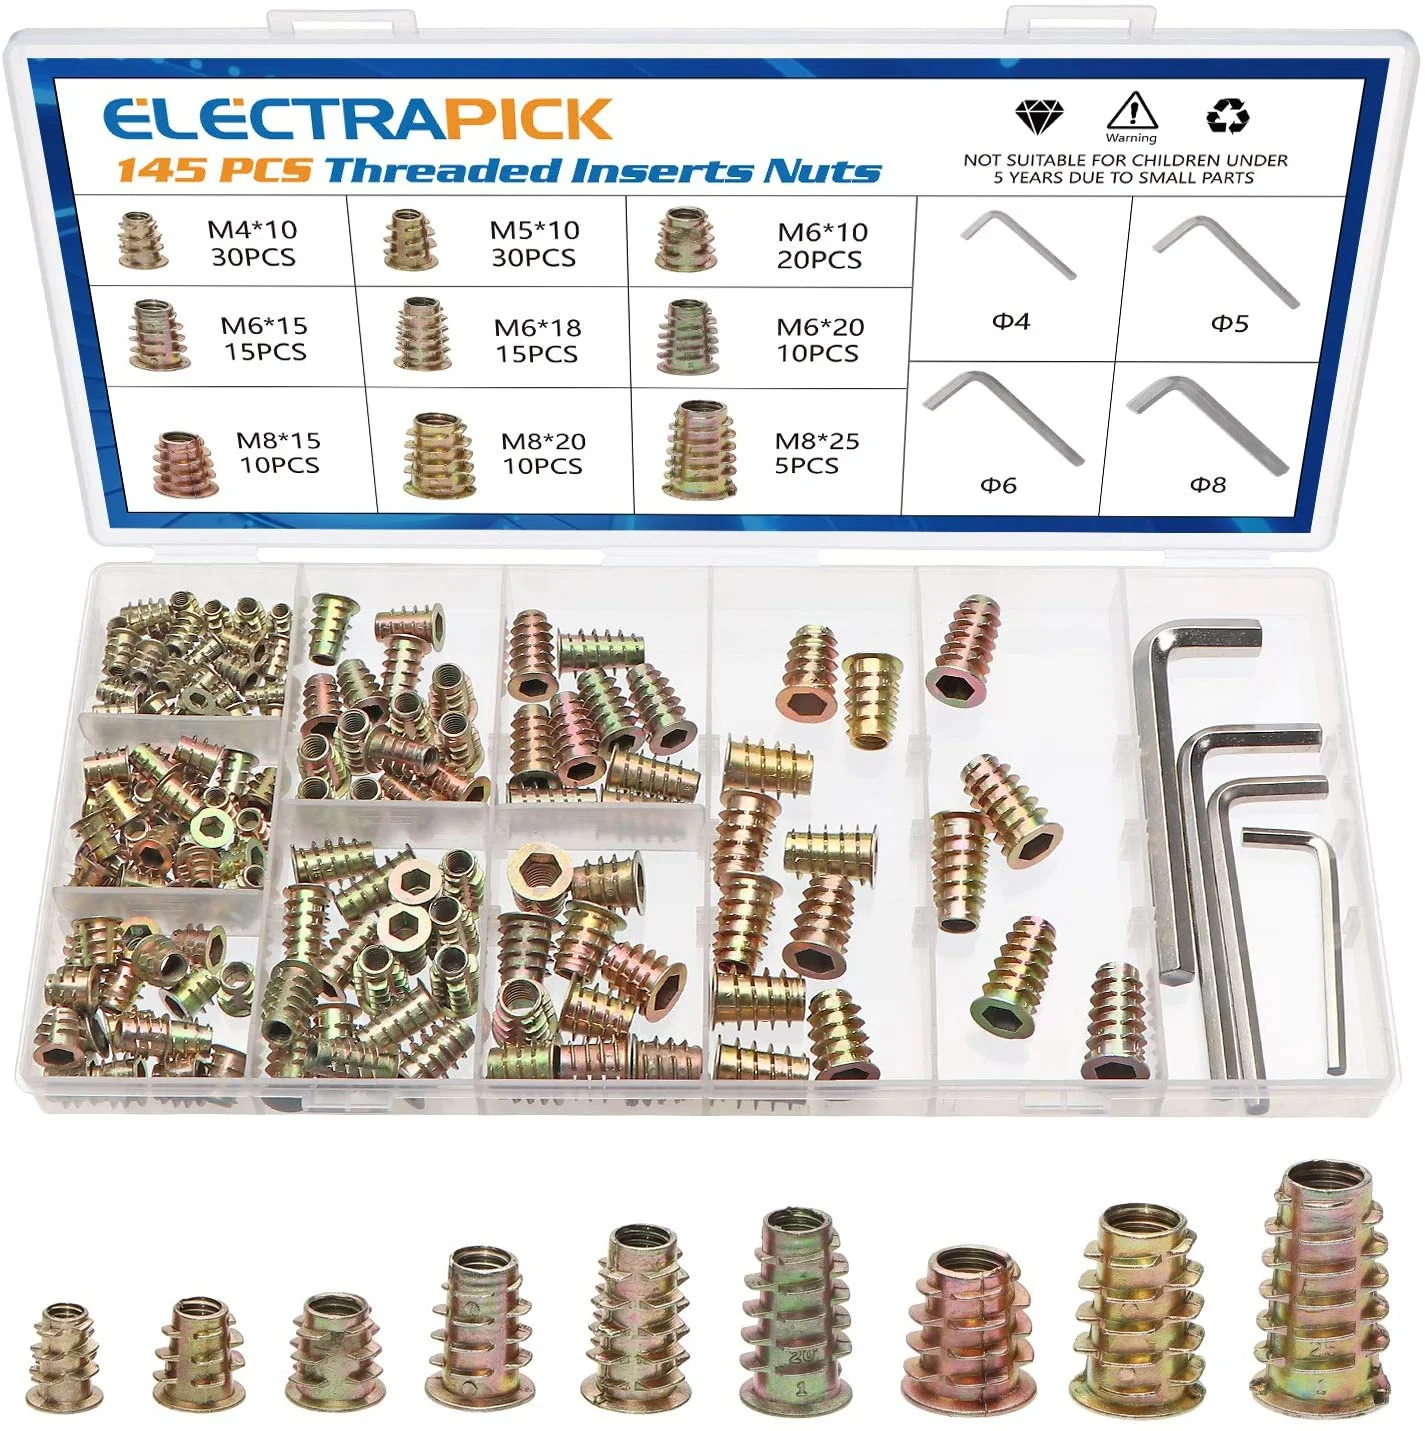 

Electrapick 145pcs M4 M5 M6 M8 Zinc Alloy Hex Socket Drive Insert Nuts Threaded For Wood Furniture Nut With Wrenchs